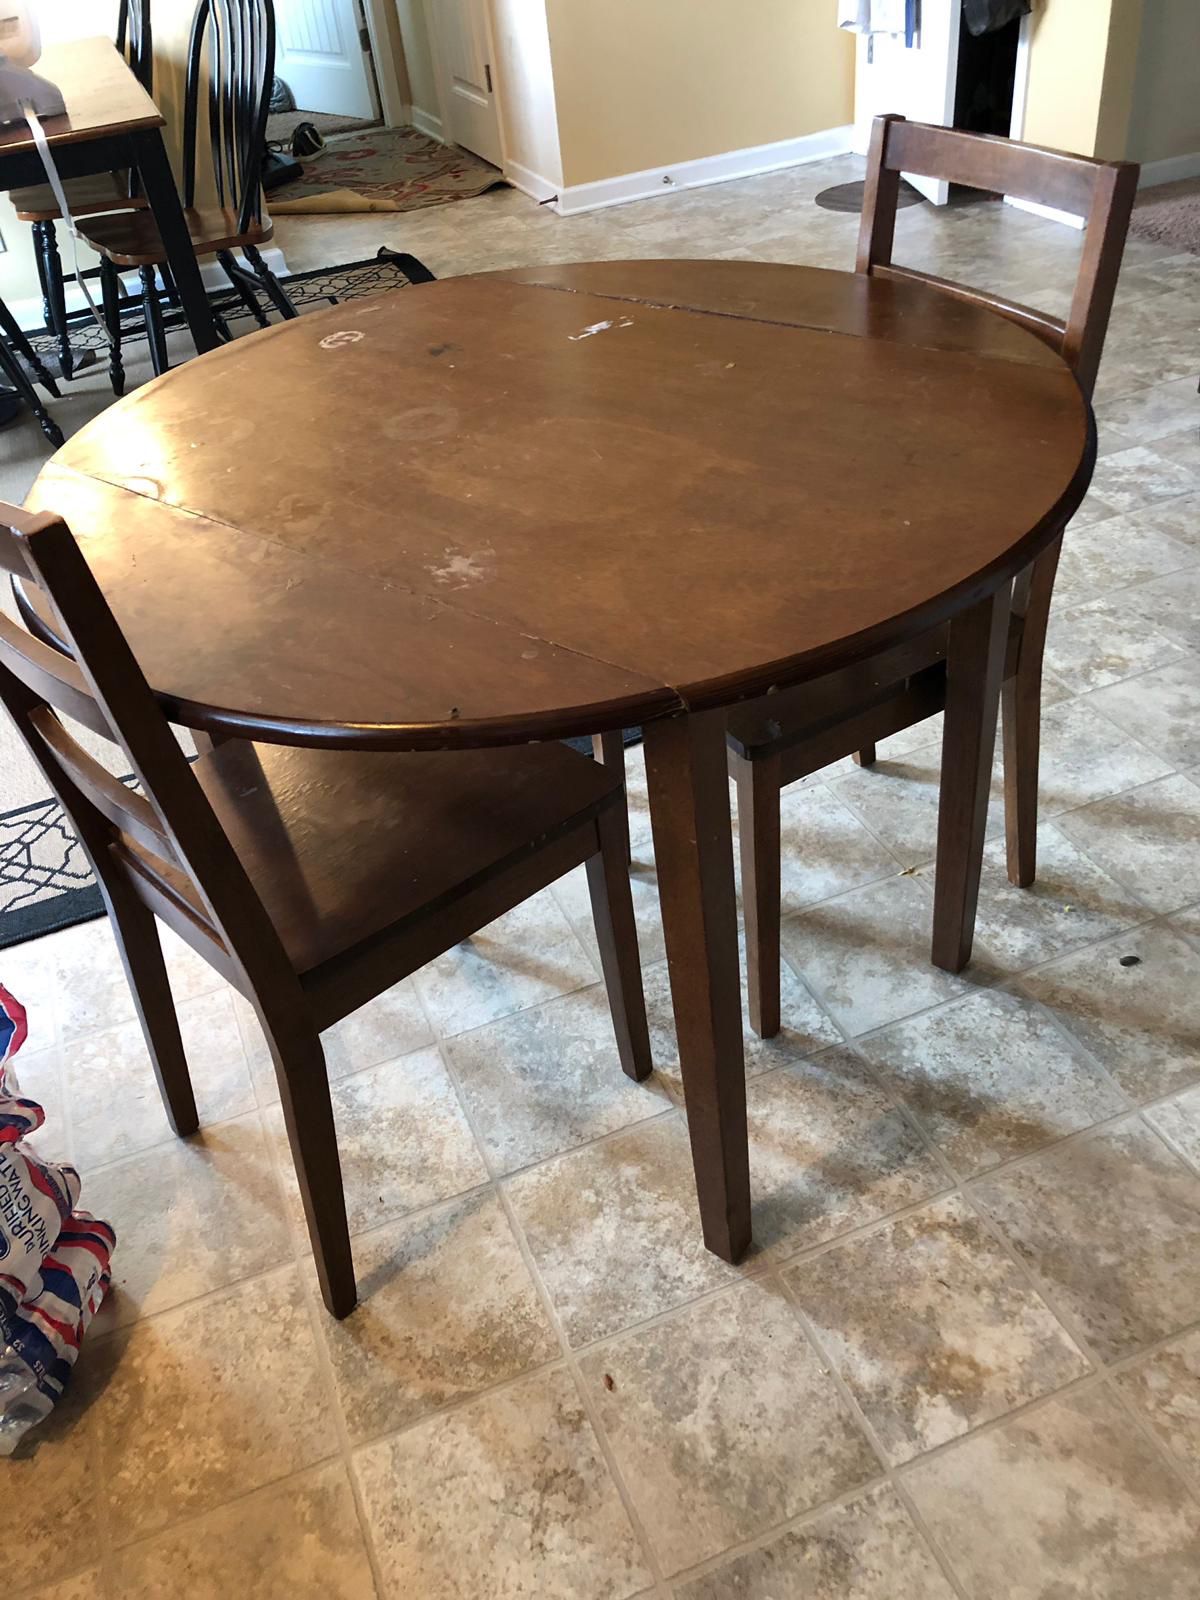 A small kitchen table